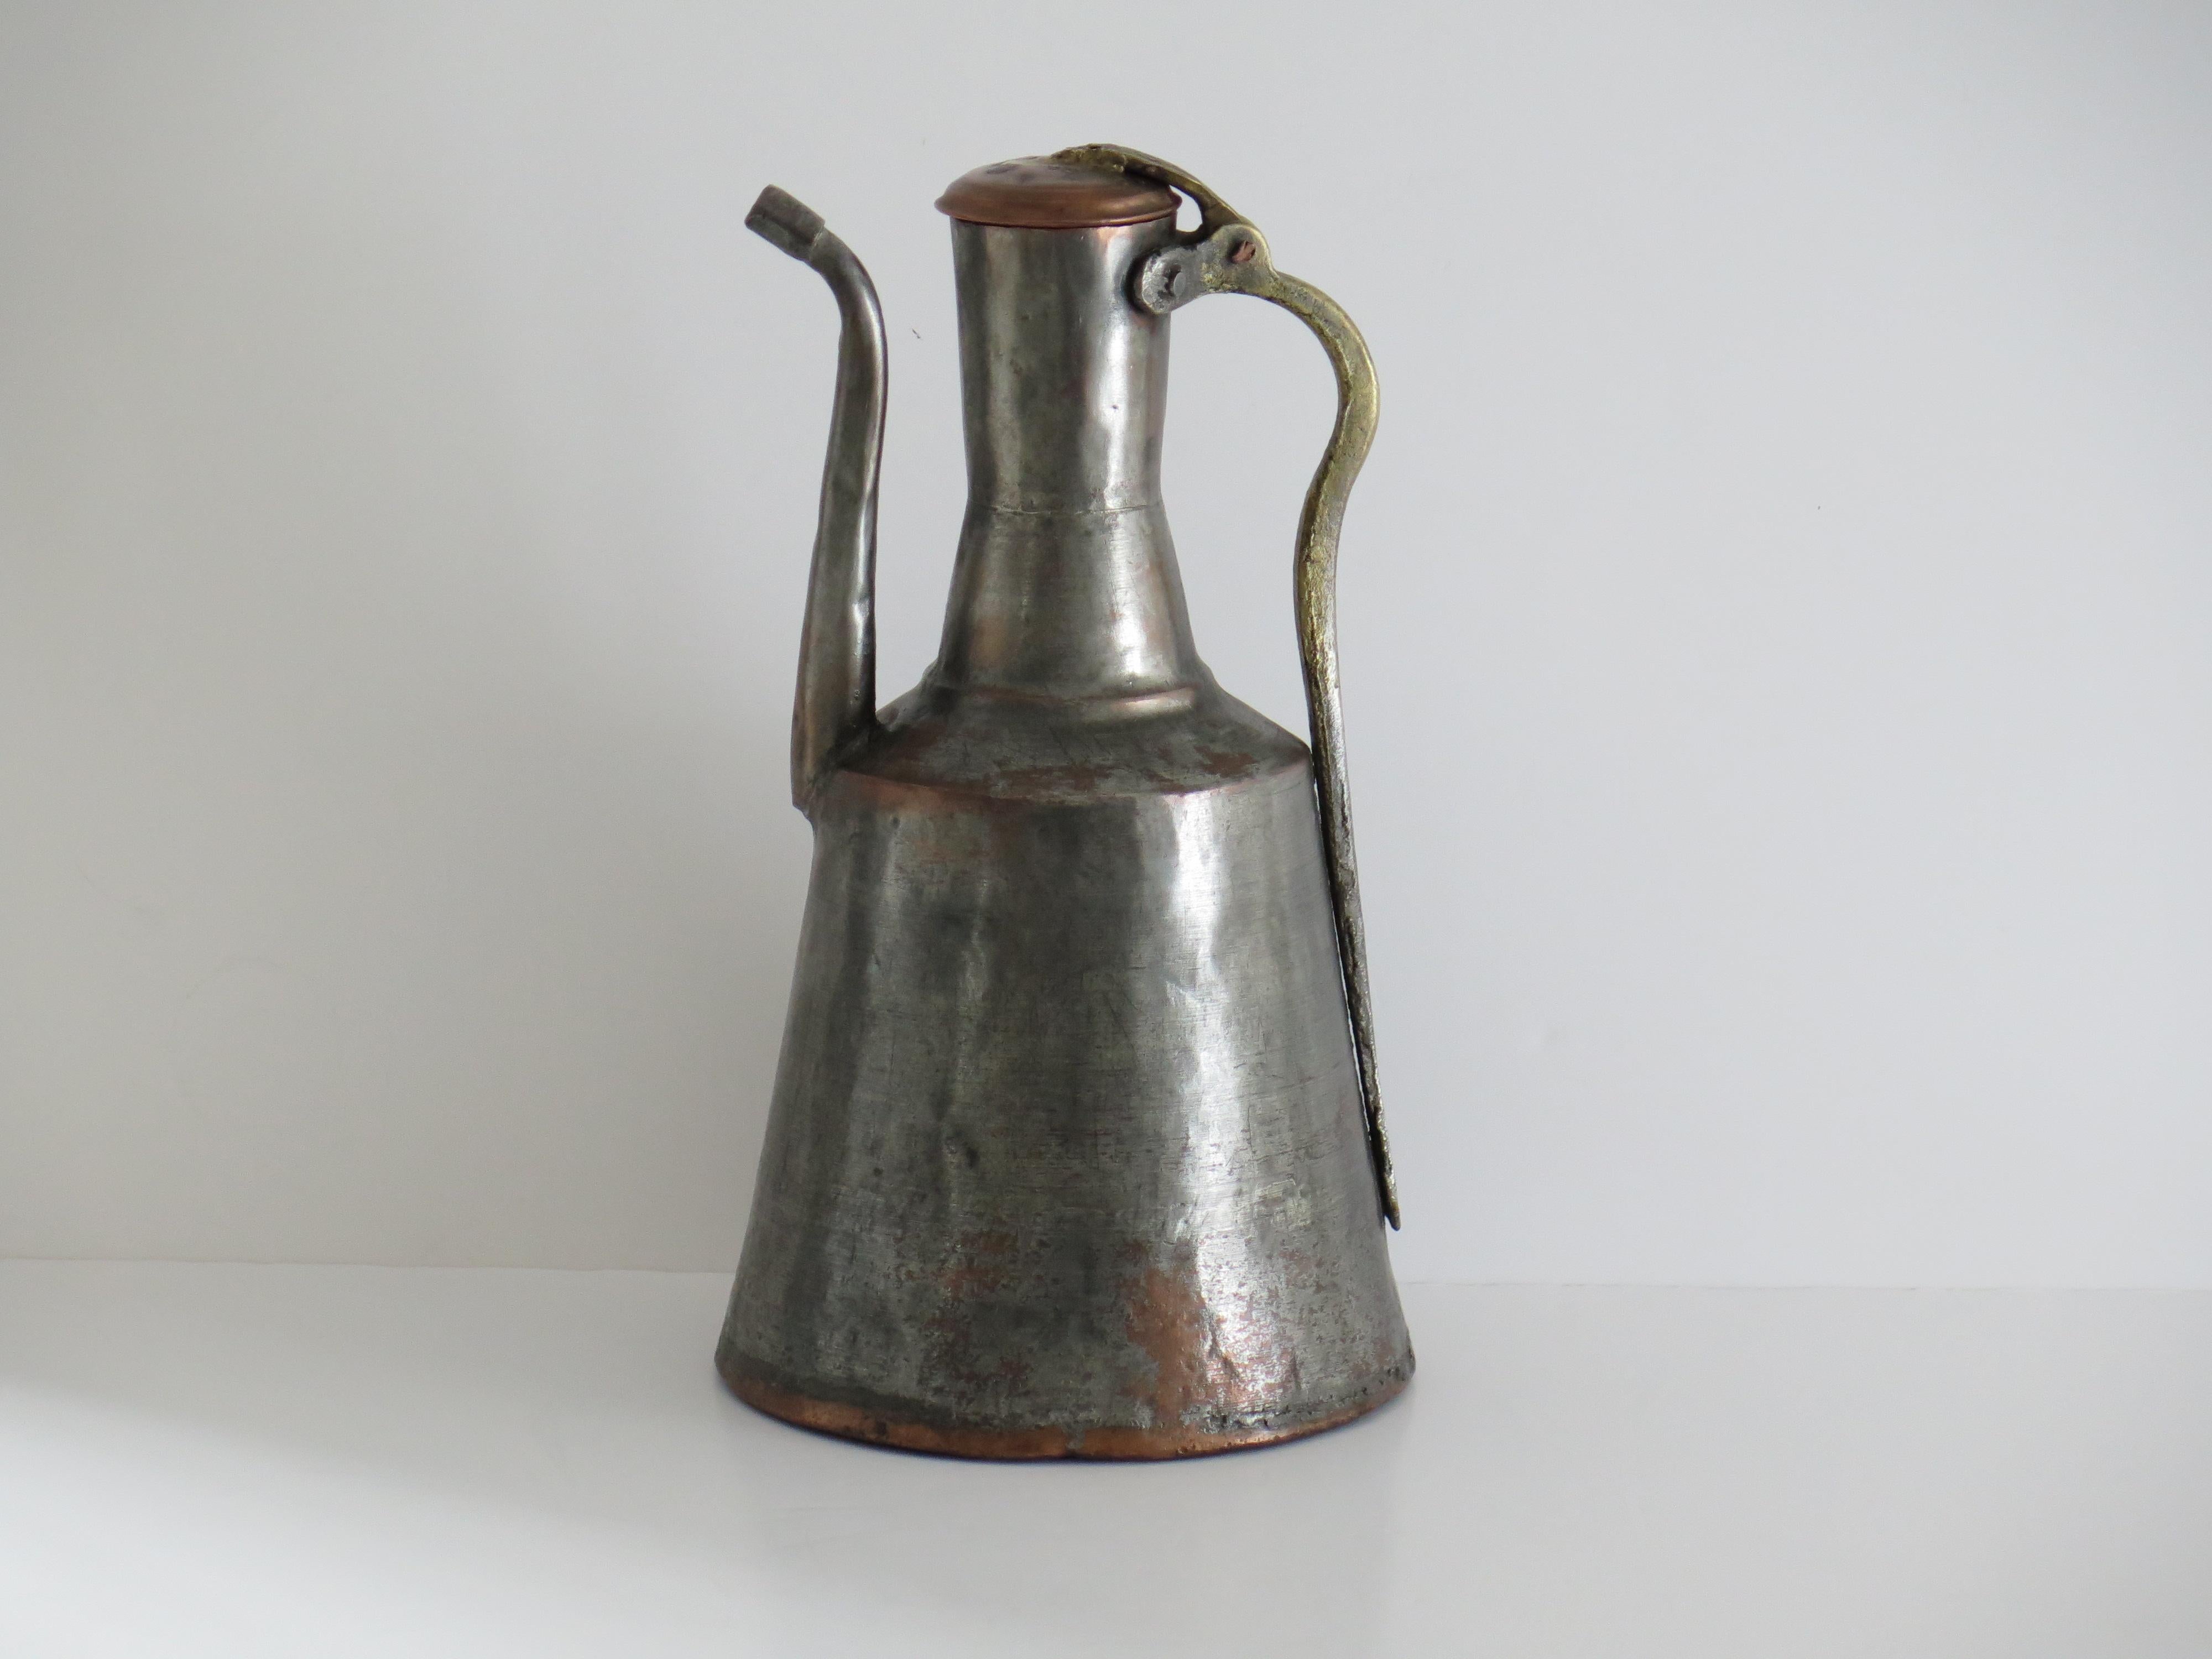 Brass Ewer or Pitcher tinned Copper Turkish / Middle Eastern, Early 19th Century For Sale